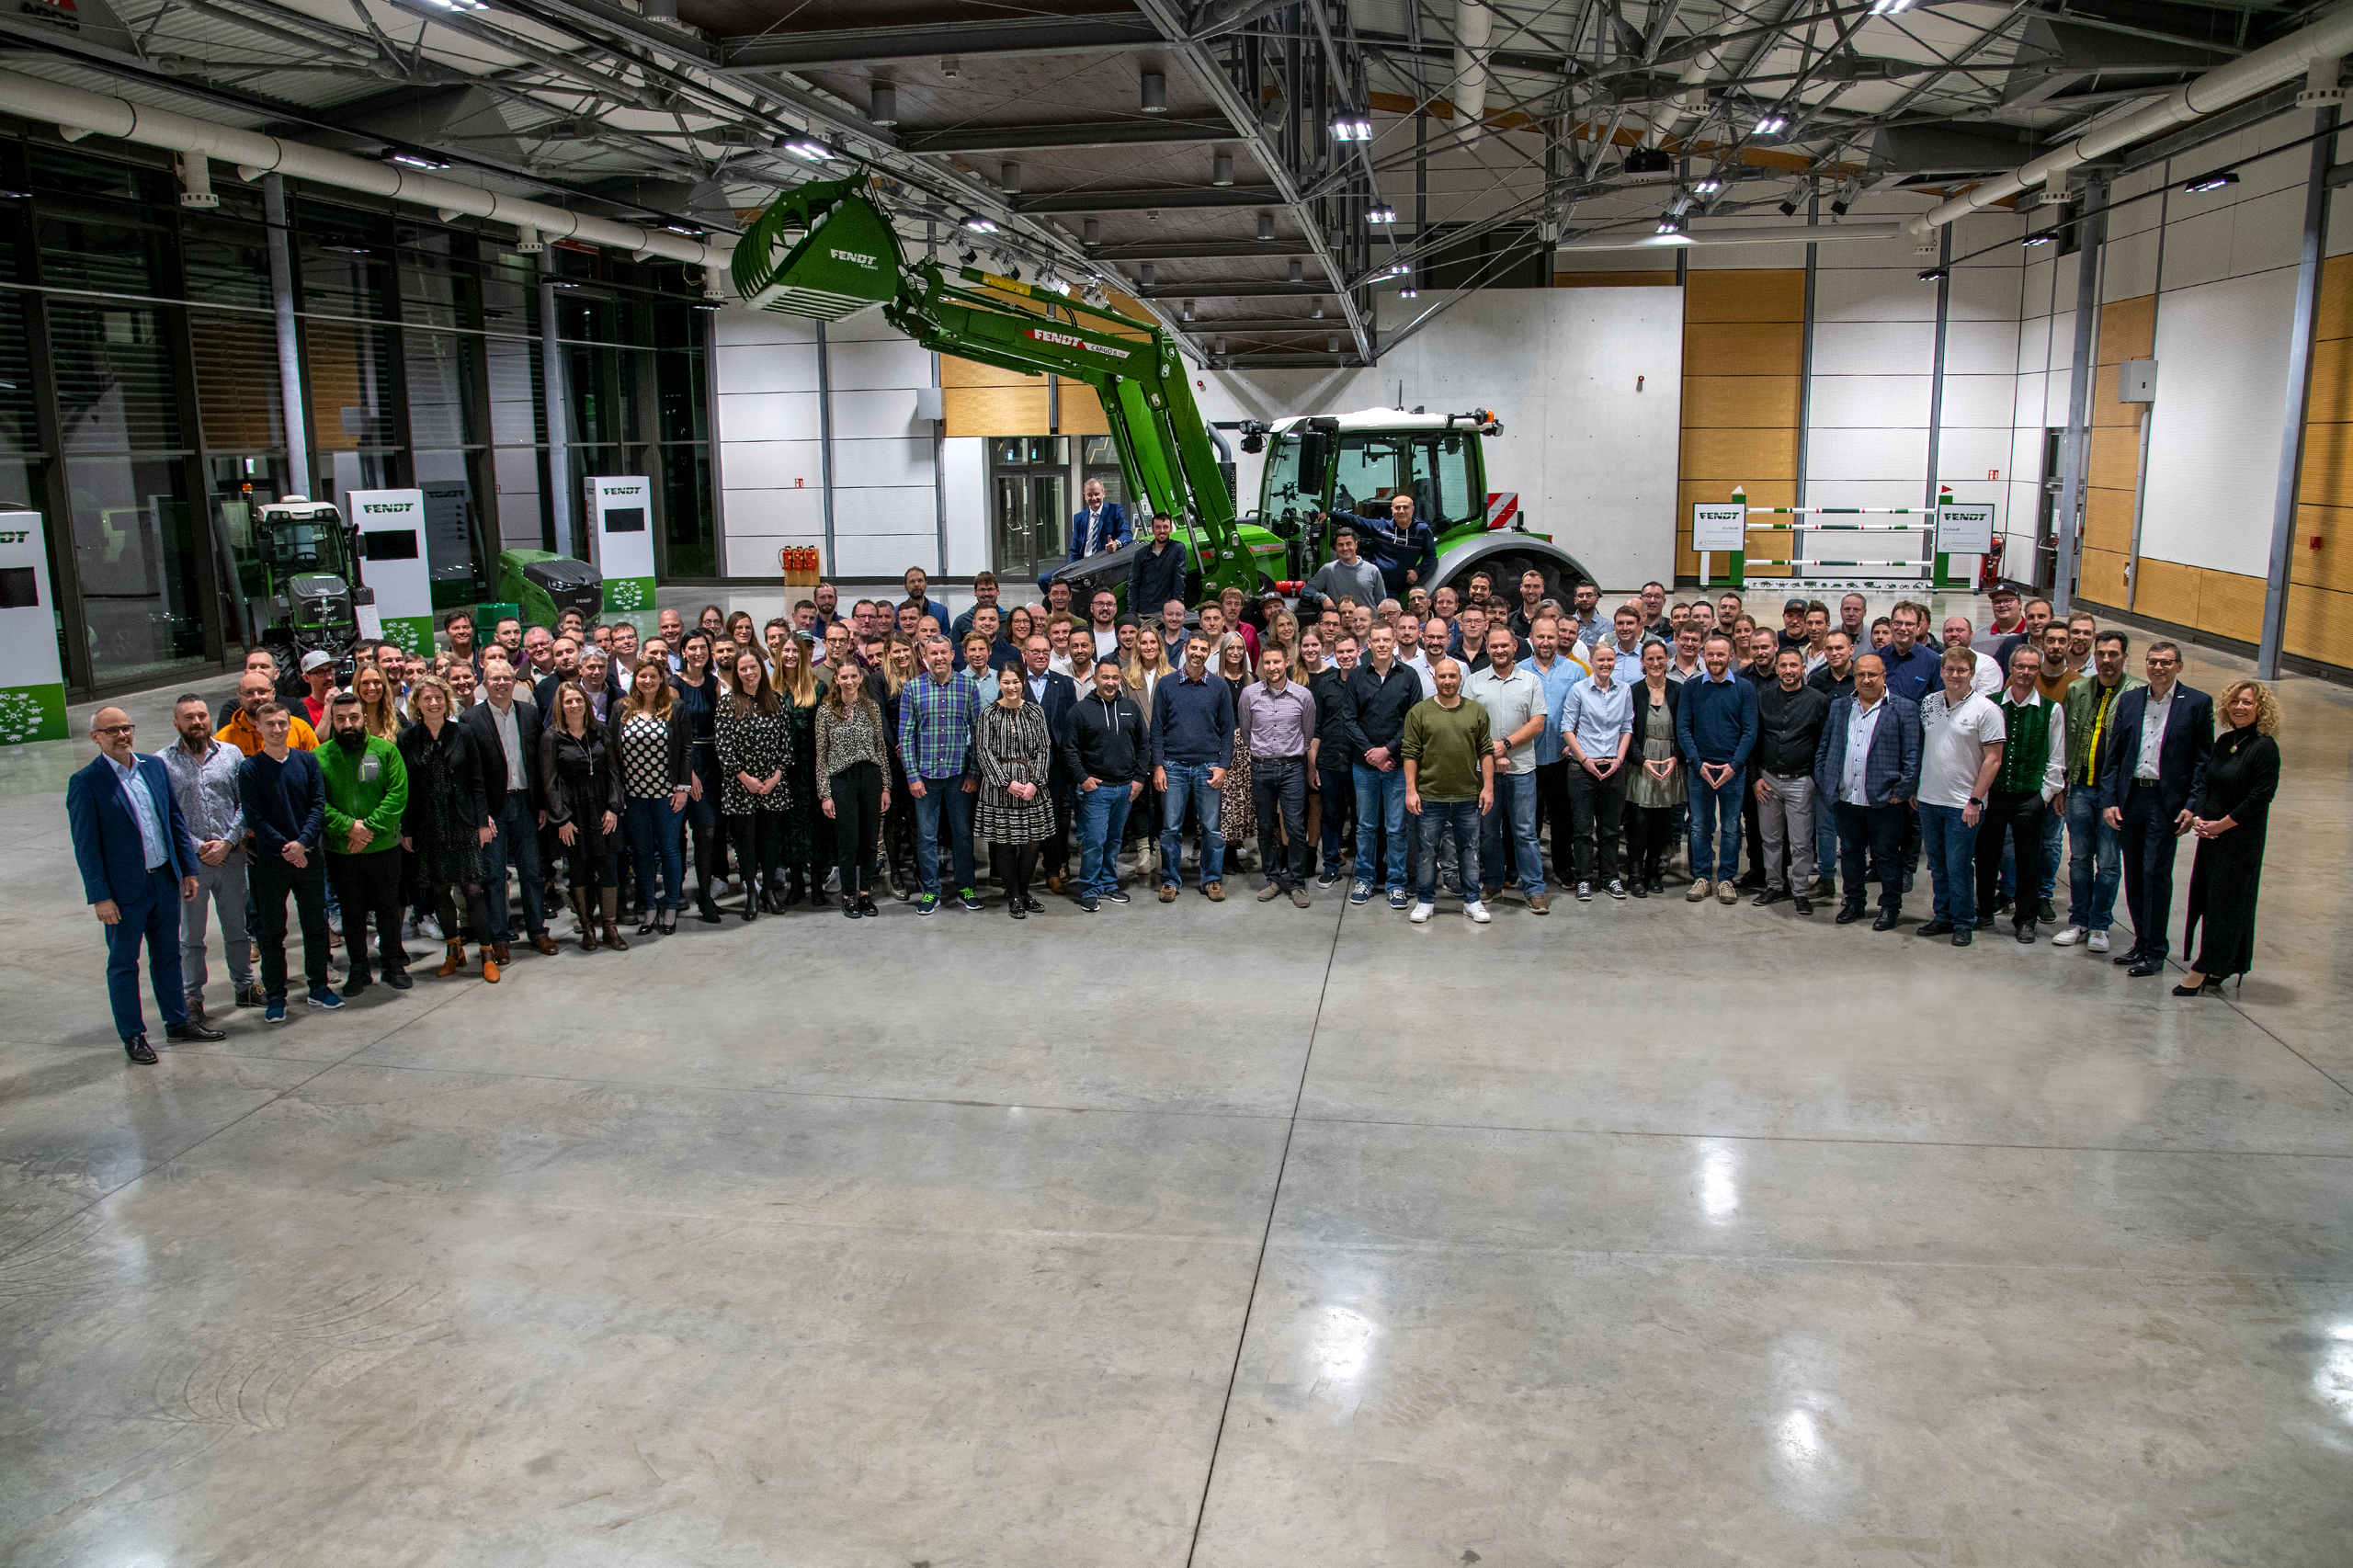 4,355 years of employment with Fendt